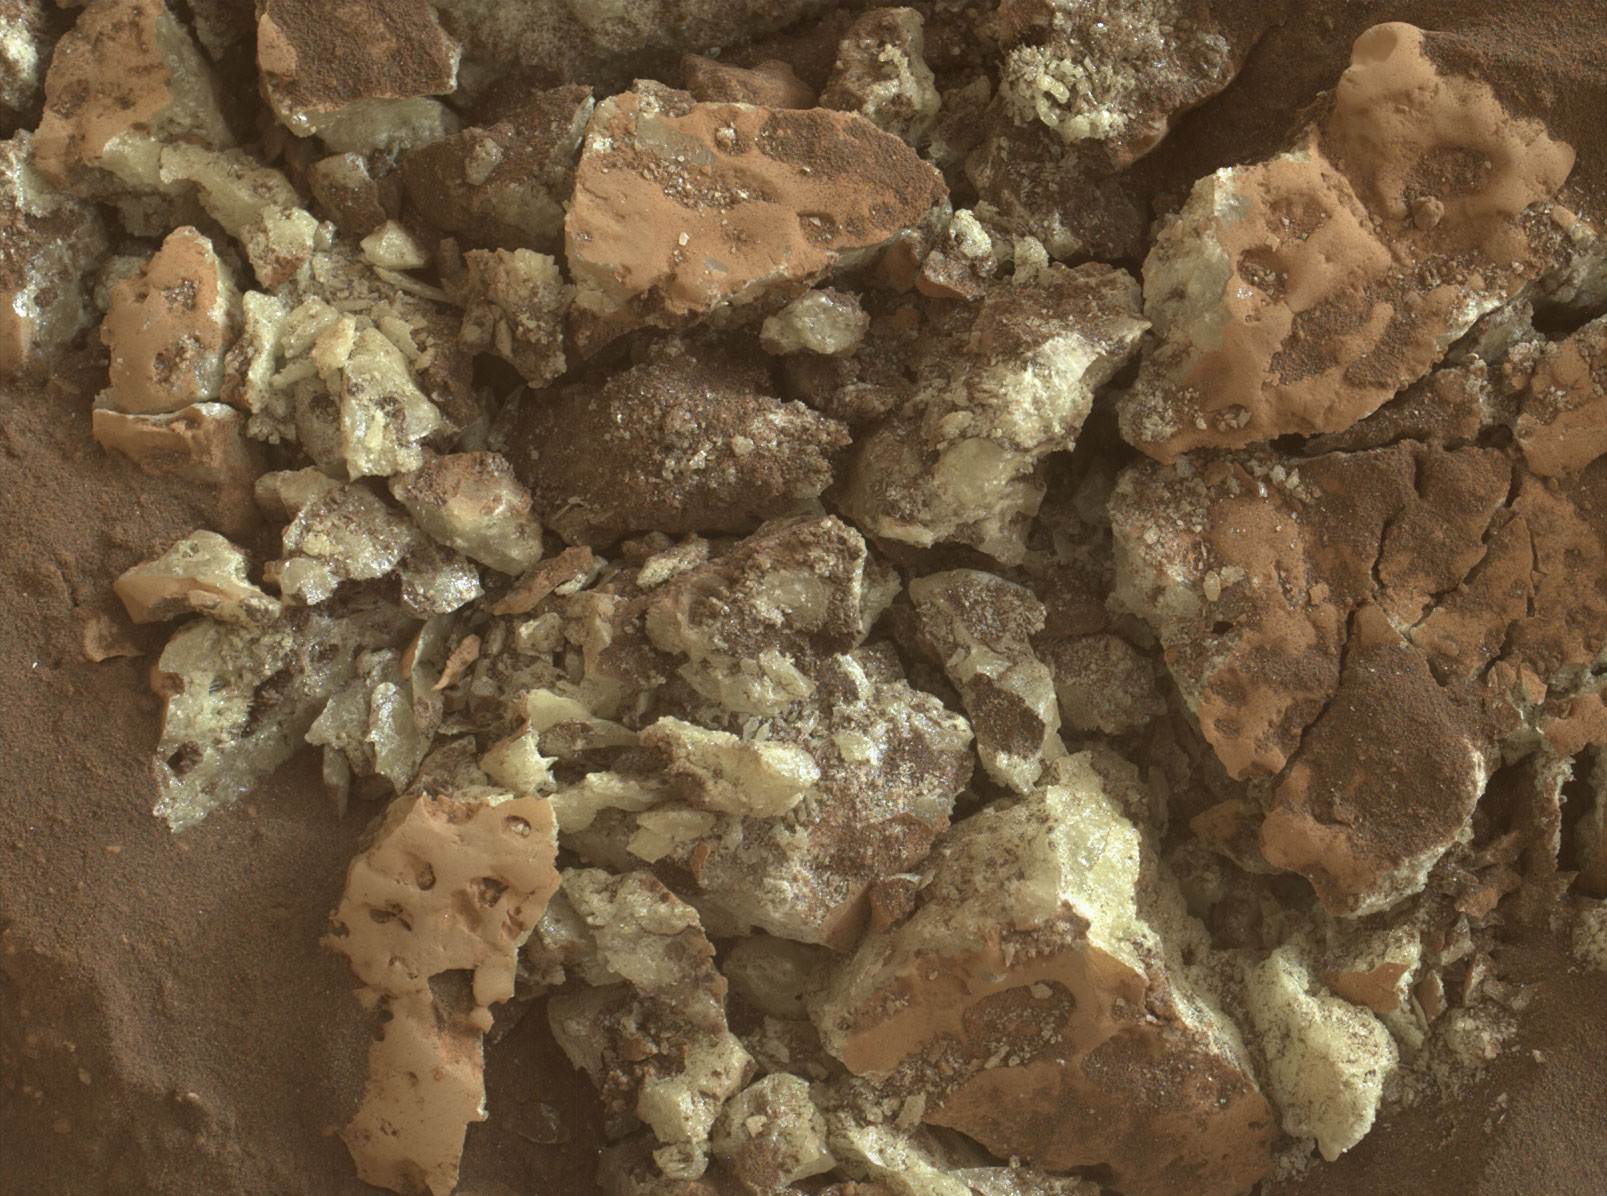 These sulfur crystals were found inside a rock after NASA’s Curiosity Mars rover happened to drive over it and crush it on May 30, 2024, the 4,200th Martian day, or sol, of the mission. This image was captured by Curiosity’s Mars Hand Lens Imager (MAHLI), a camera on the end of its robotic arm, on June 4, 2024, the 4,205th Martian day, or sol, of the mission.